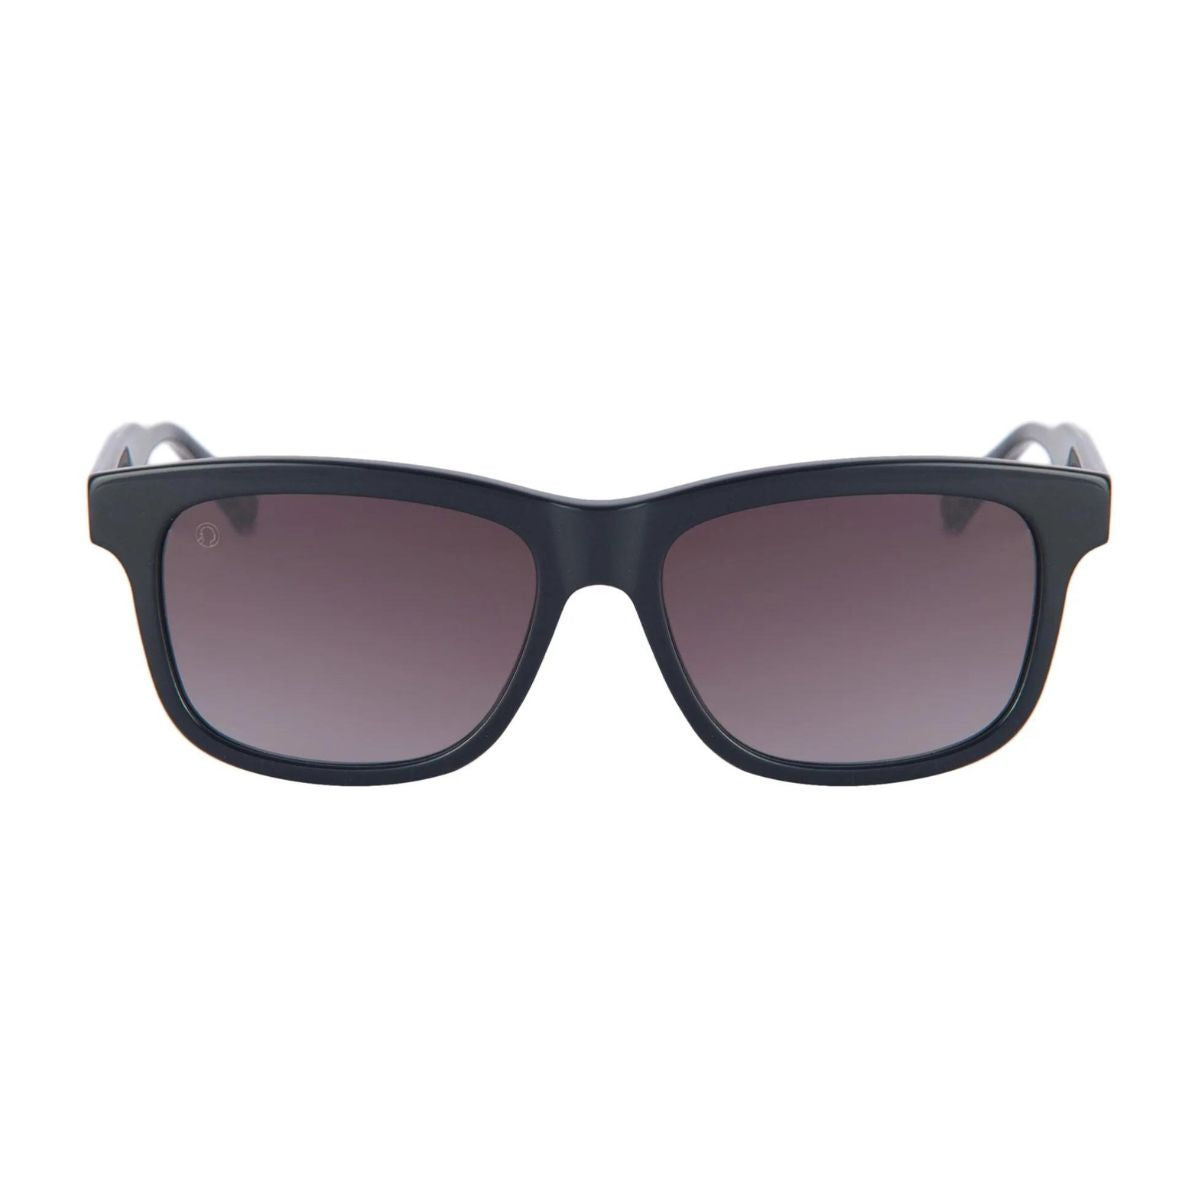 "Buy The Monk Enigma C1 Stylish Sunglass For Men's At Optorium"